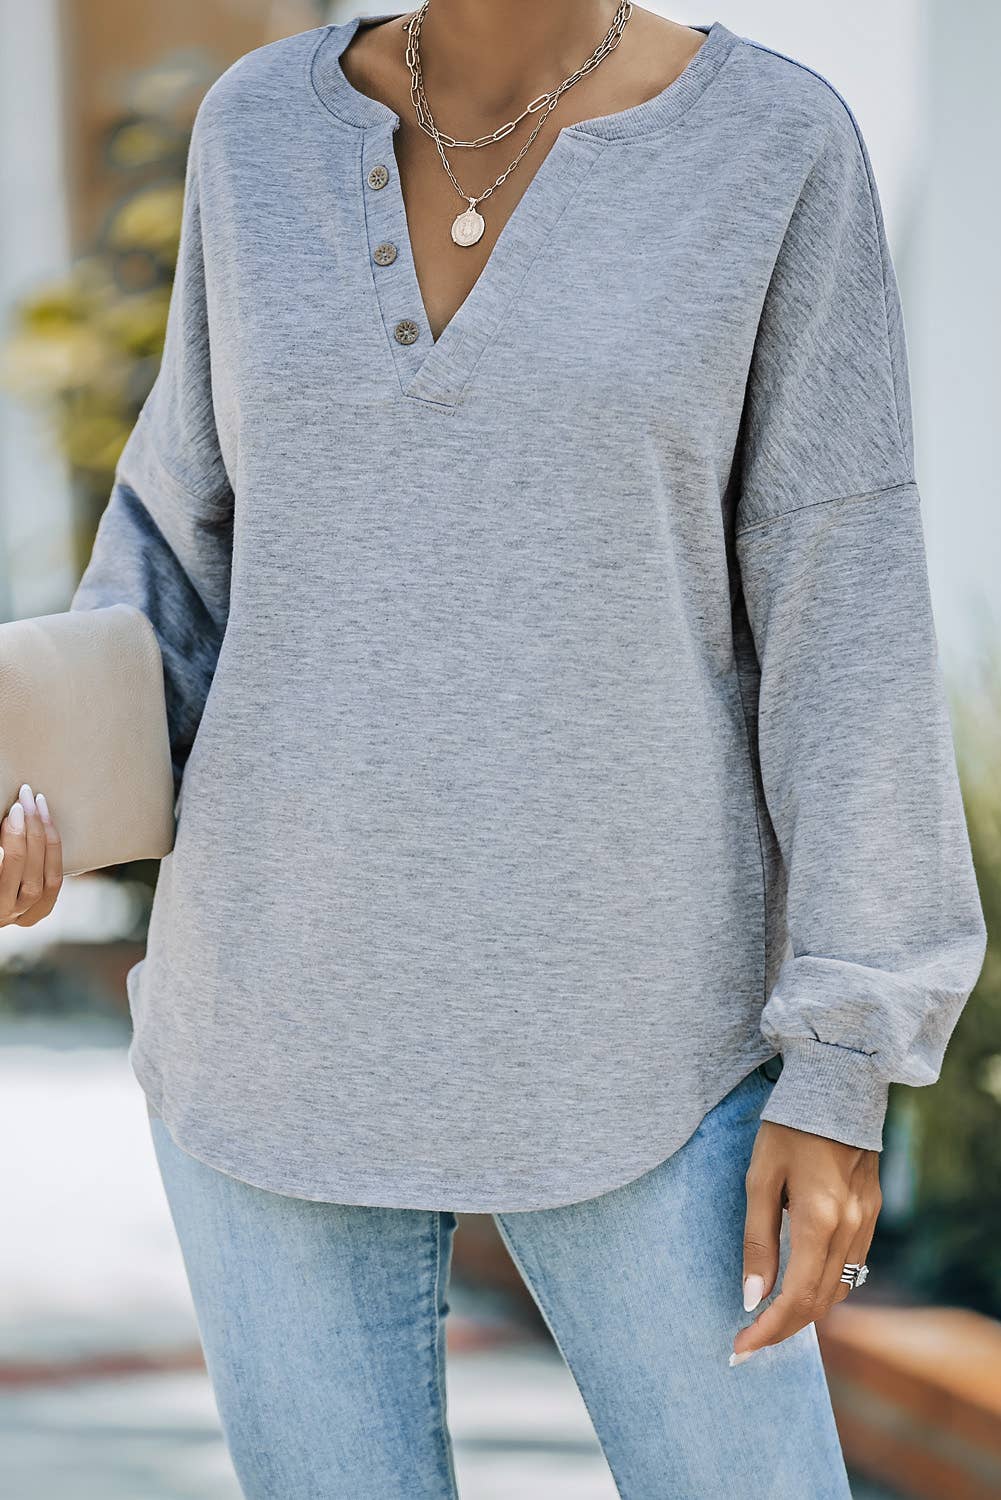 Shiying fashion - Gray Buttoned V Neck Cotton Loose Fit Top